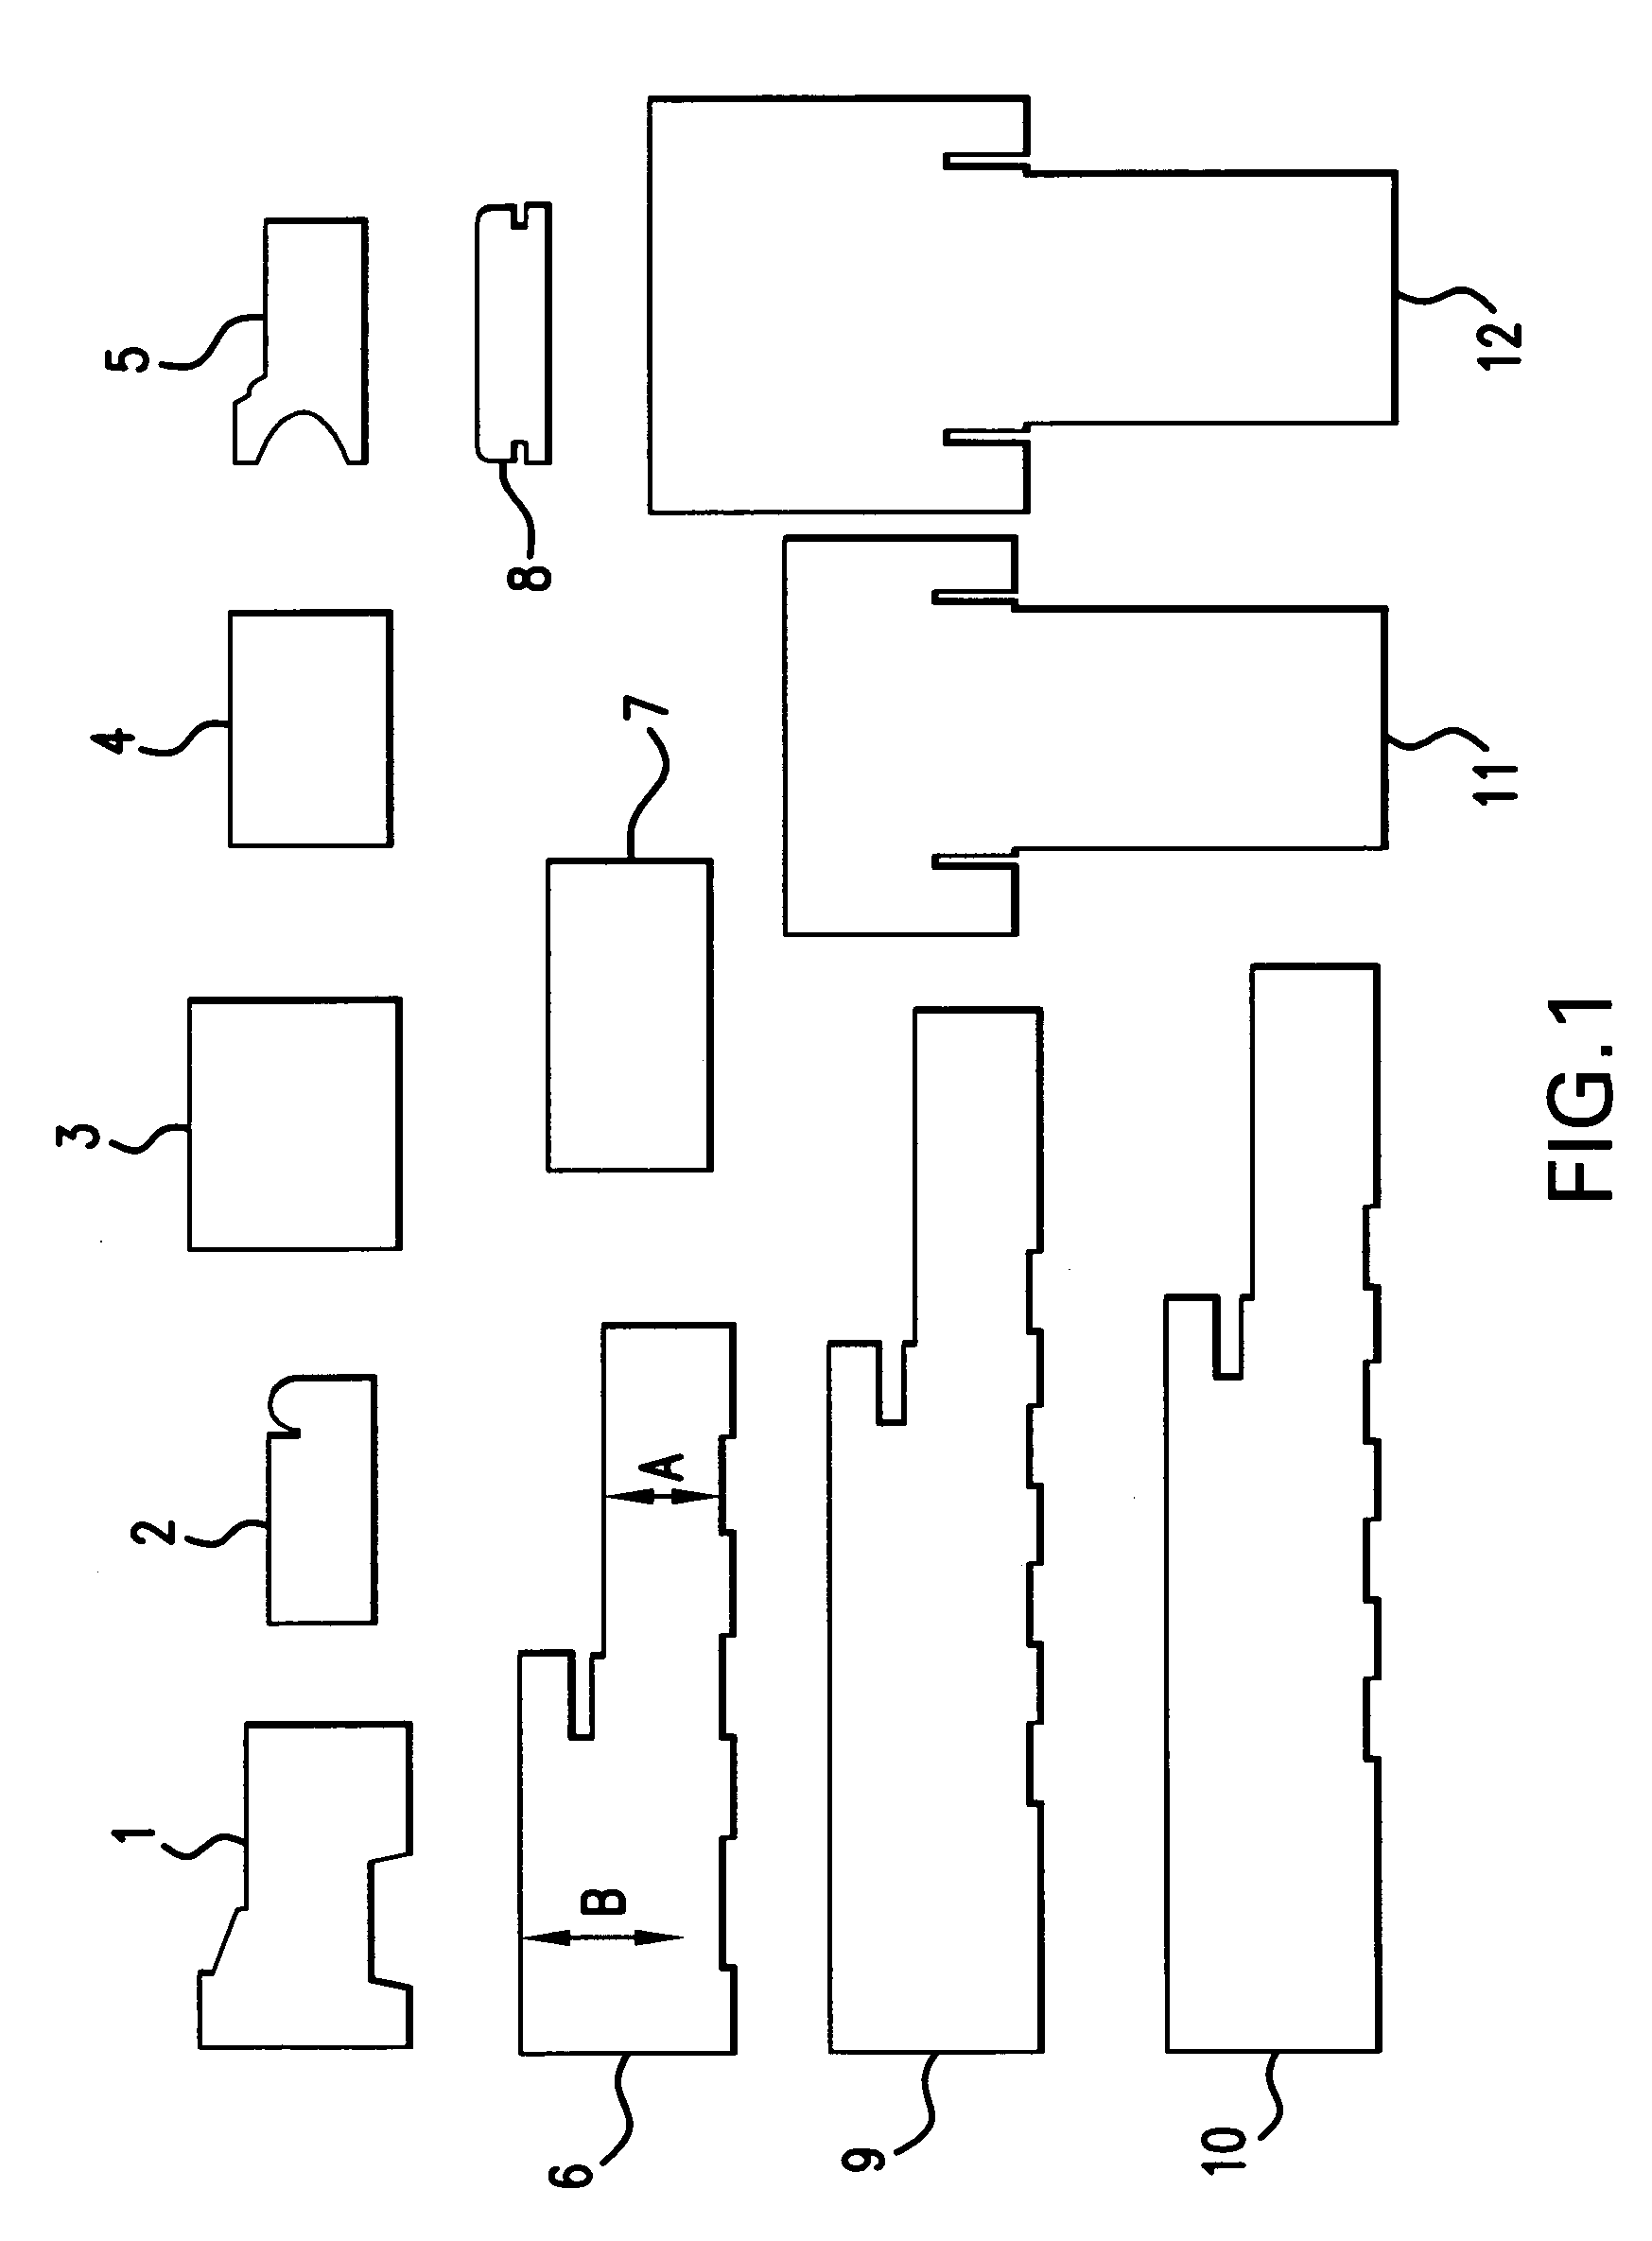 Polymer wood composite material and method of making same